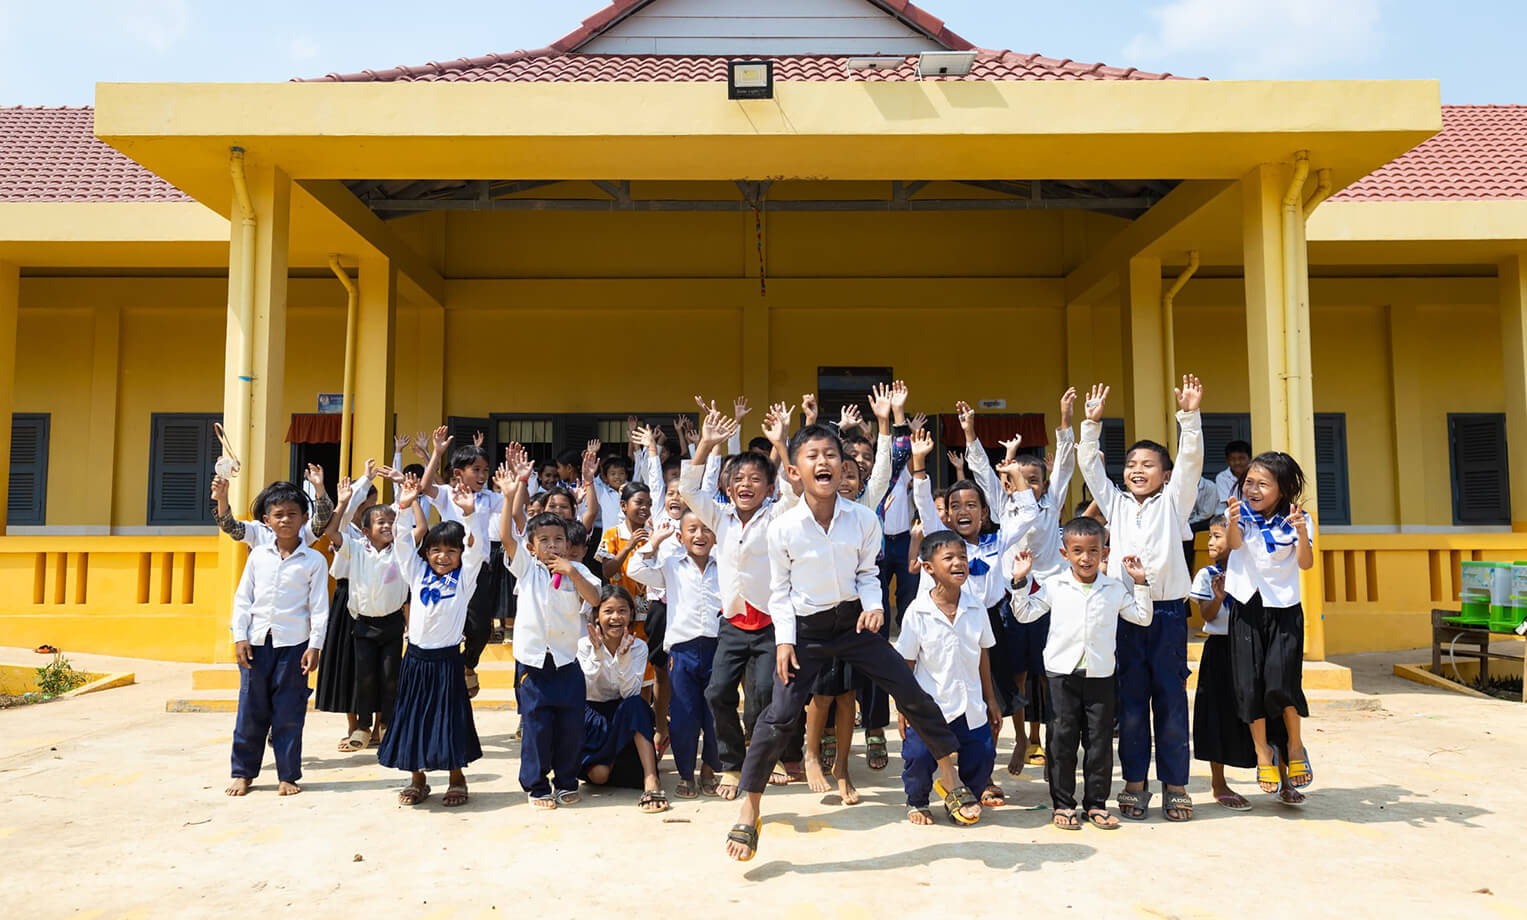 New schools are creating new opportunities for children around the world, and new open doors for the Gospel.